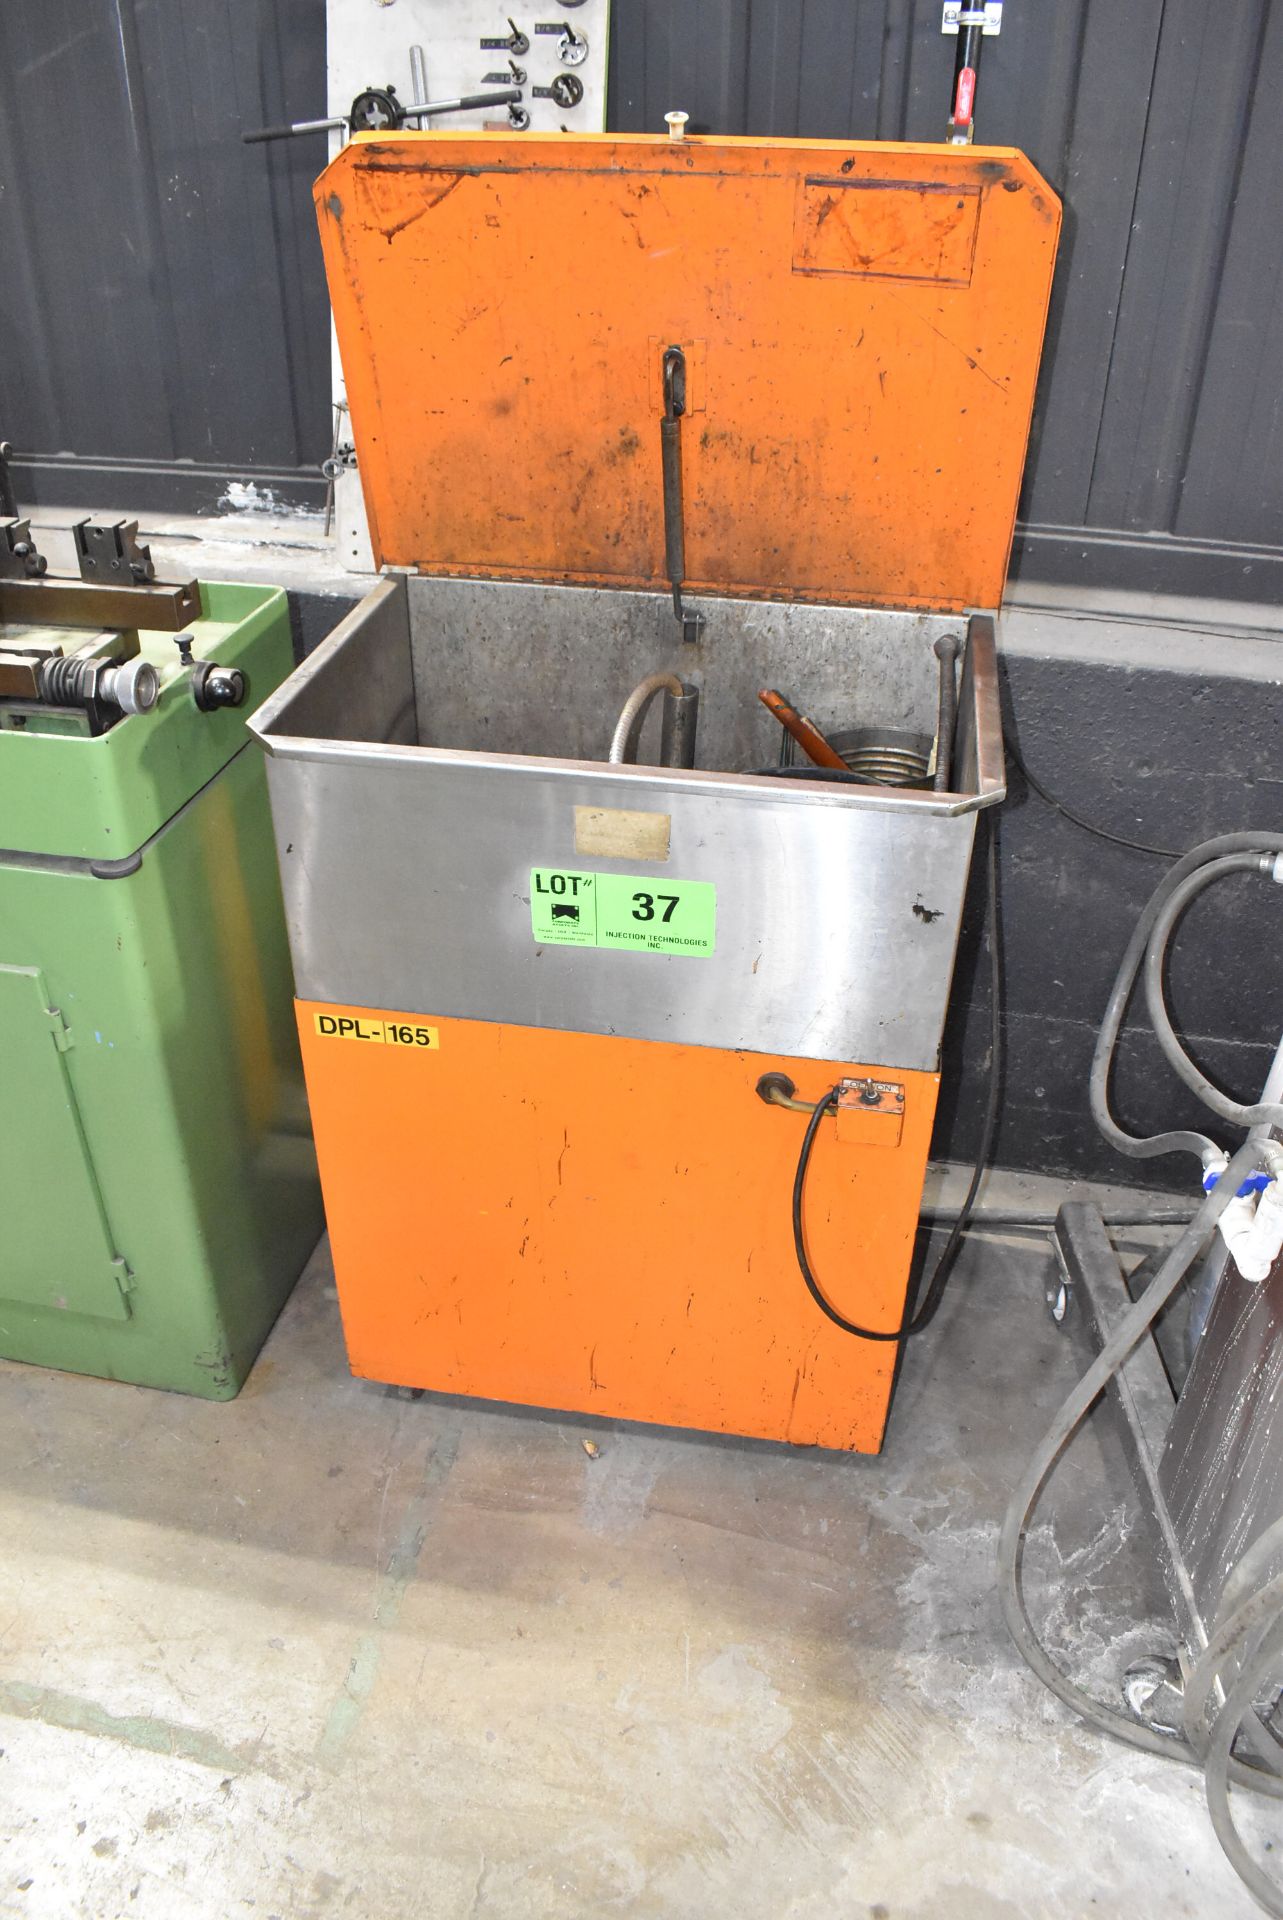 SAFETY-KLEEN STAINLESS STEEL PARTS WASHER, S/N N/A (CI) [RIGGING FEES FOR LOT #37 - $30 USD PLUS